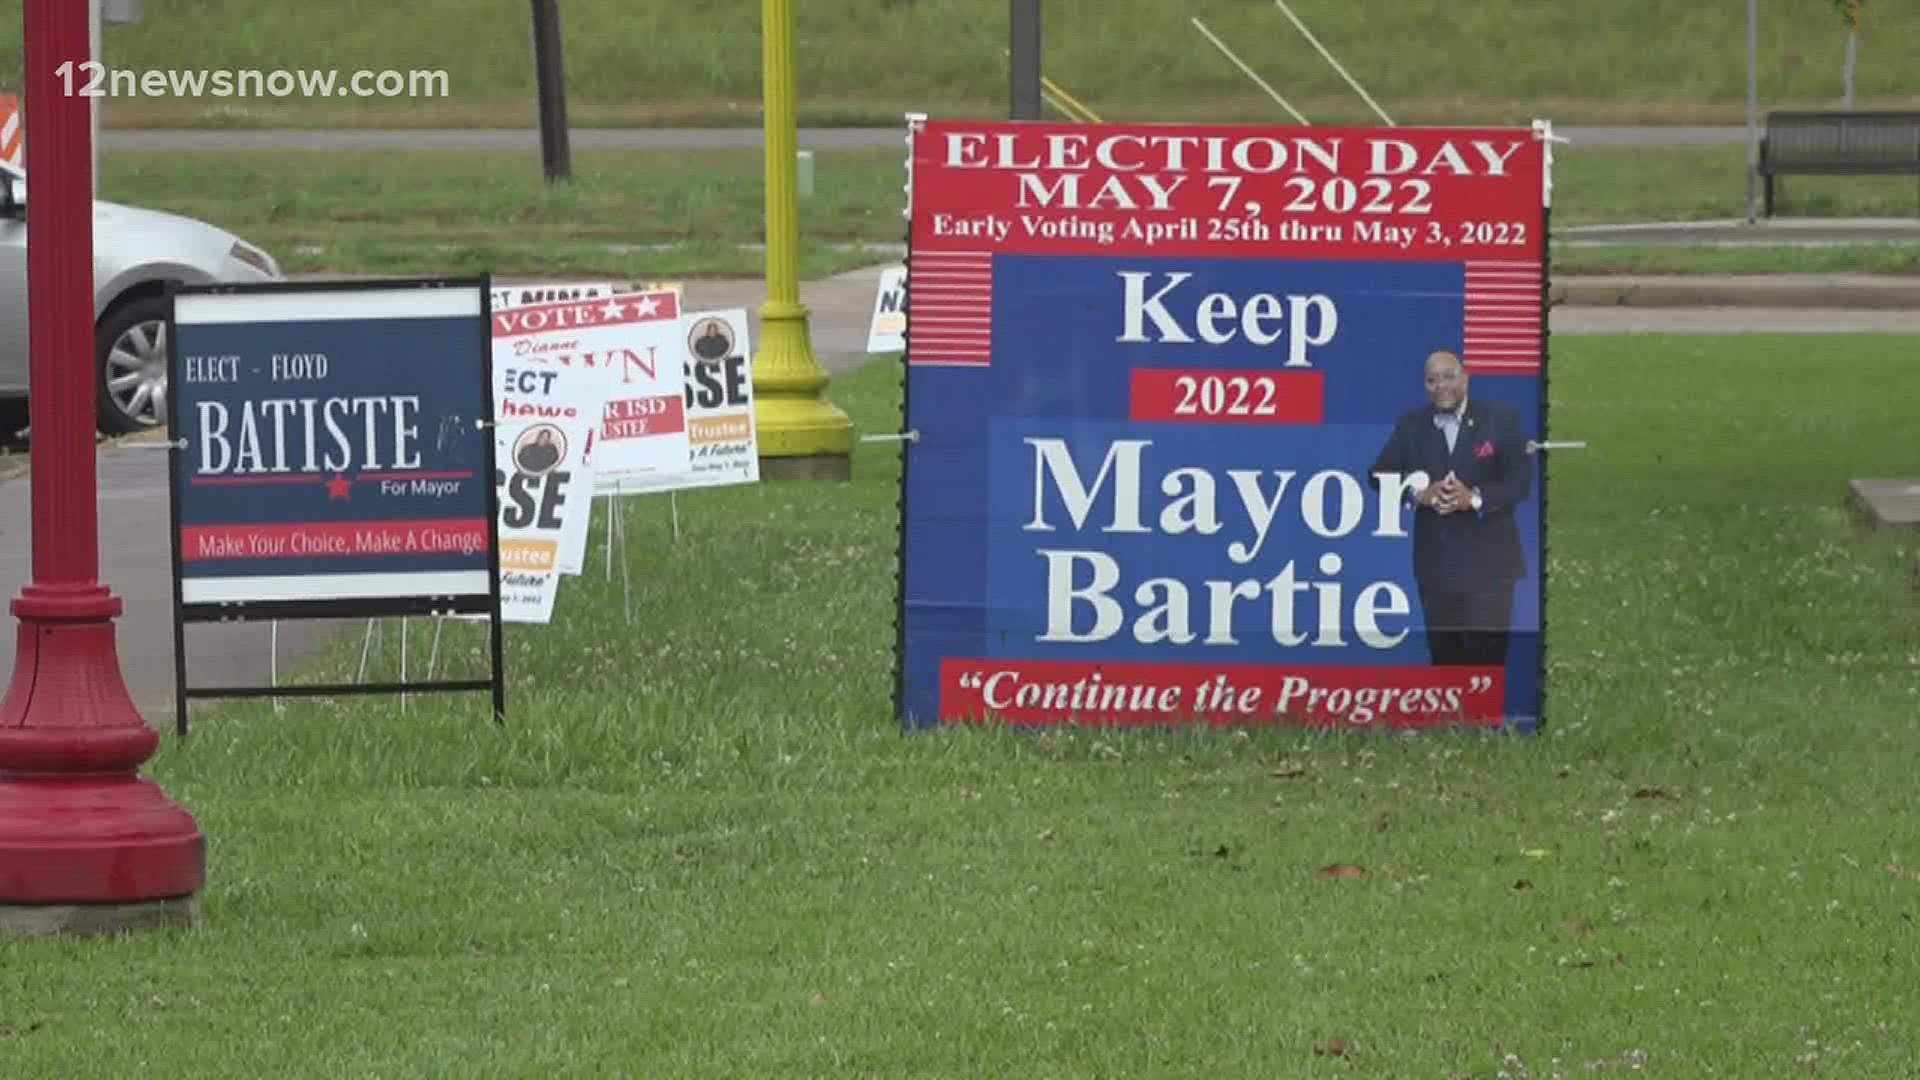 Candidates Floyd Batiste and Incumbent Thurman Bartie are the two facing off in the runoff election for the city of Port Arthur.